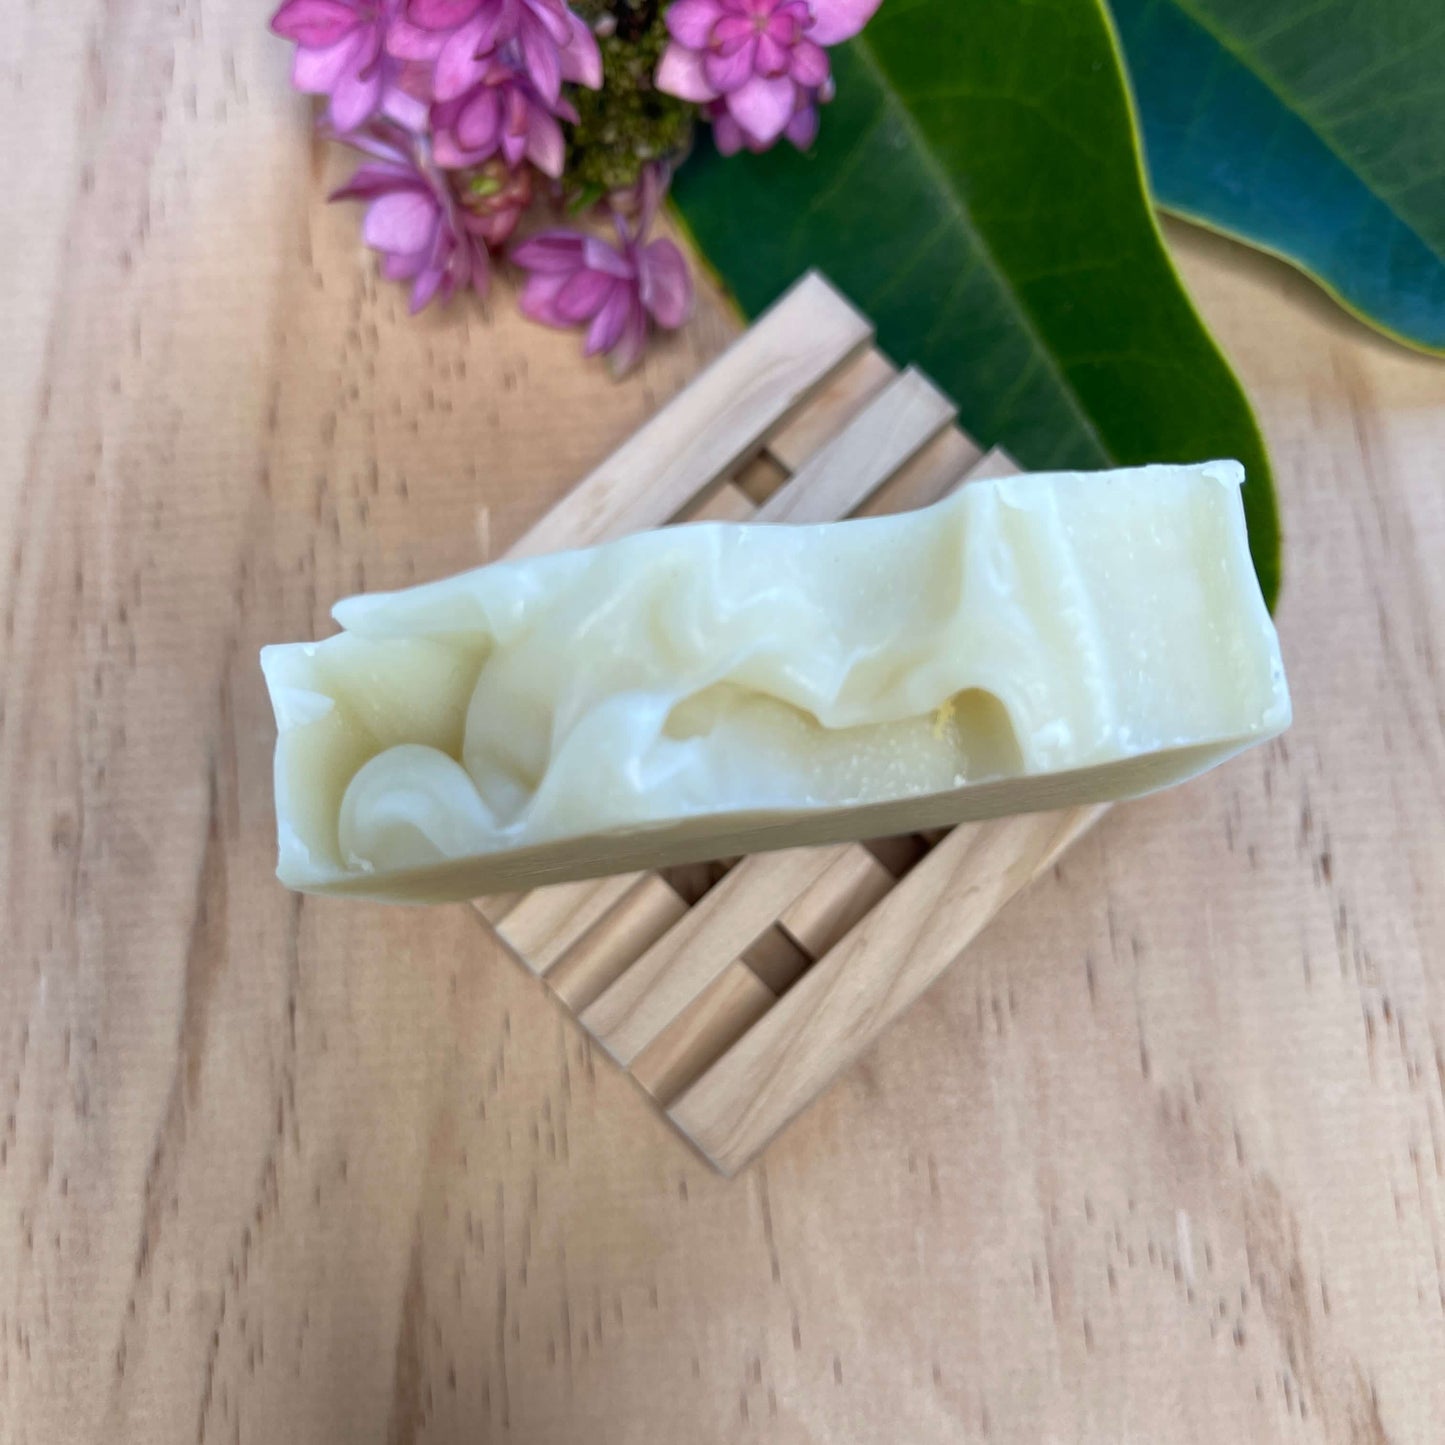 Lavender body soap on a wooden soap dish.